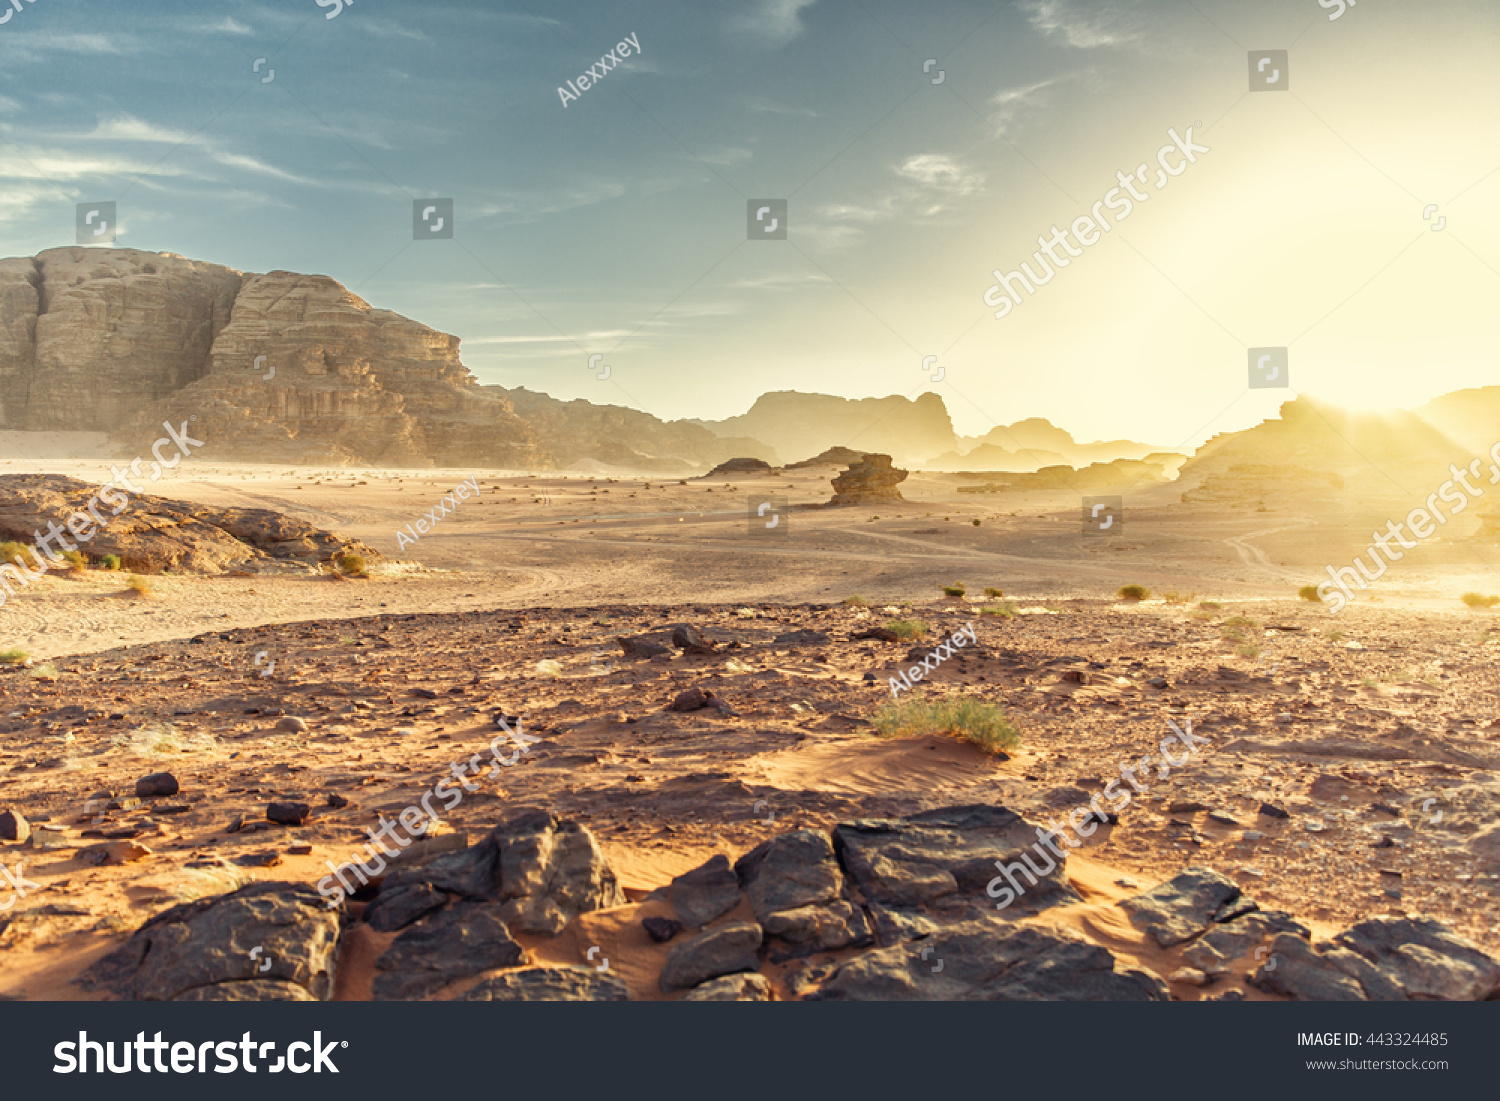 Desert Landscape of Wadi Rum in Jordan, with a sunset, stones, bushes and the sky. #443324485